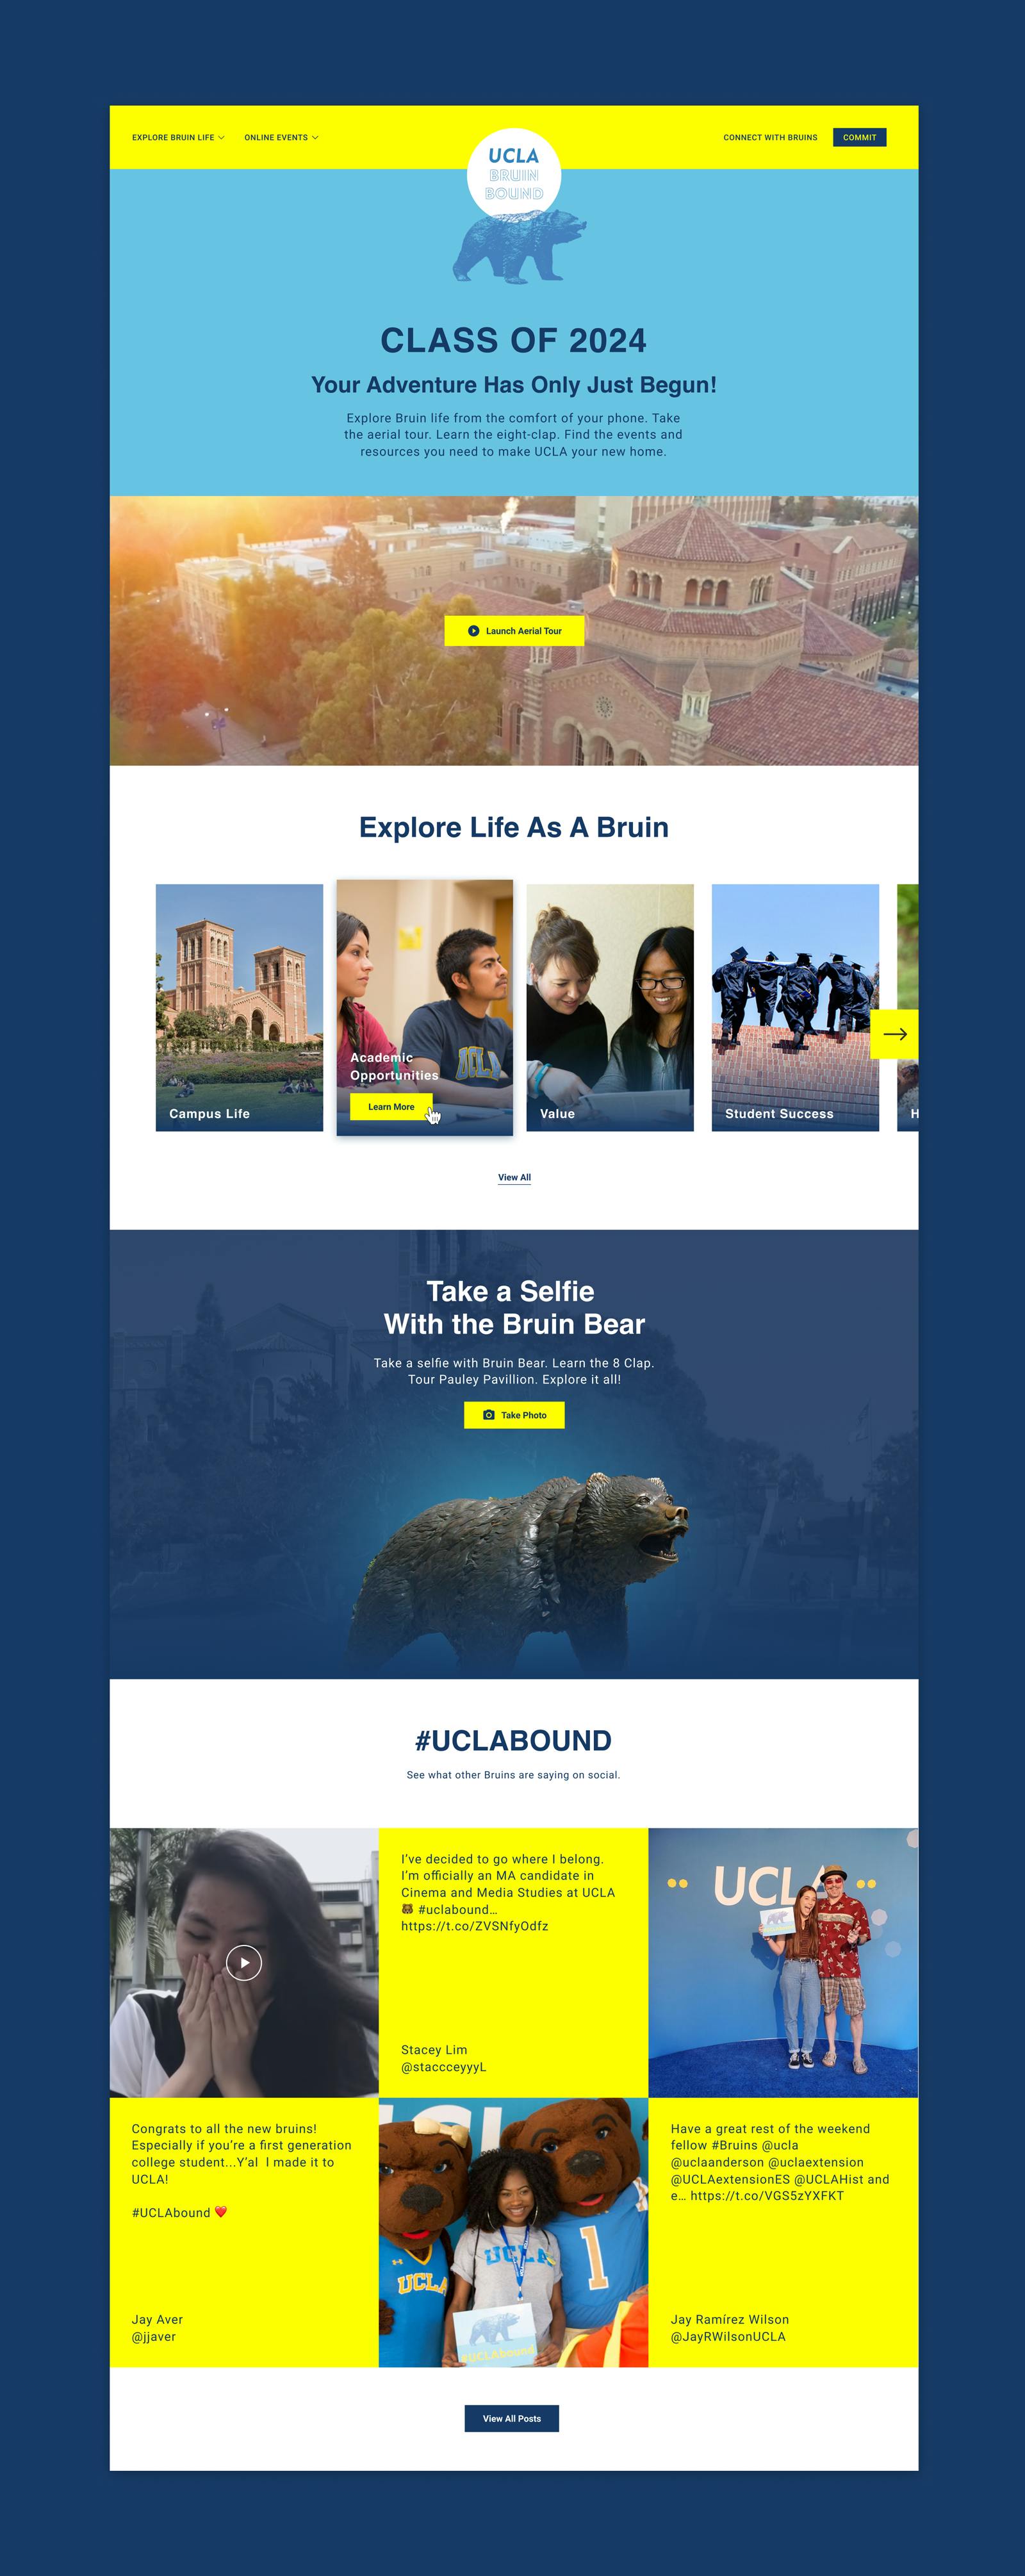 UCLA Bruin Bound homepage design on a blue background. Top section has the UCLA Bruin Bound logo and text "Class of 2024 Your Adventure Has Only Just Begun". Below that is an aerial shot of UCLA campus, then a carousel of images about each part of attending the UCLA school (Campus Life, Academic Opportunities, Value, Student Success). Then there is a section to Take a Selfie with the Bruin Bear. Last is a social media module of Instagram images and tweets.